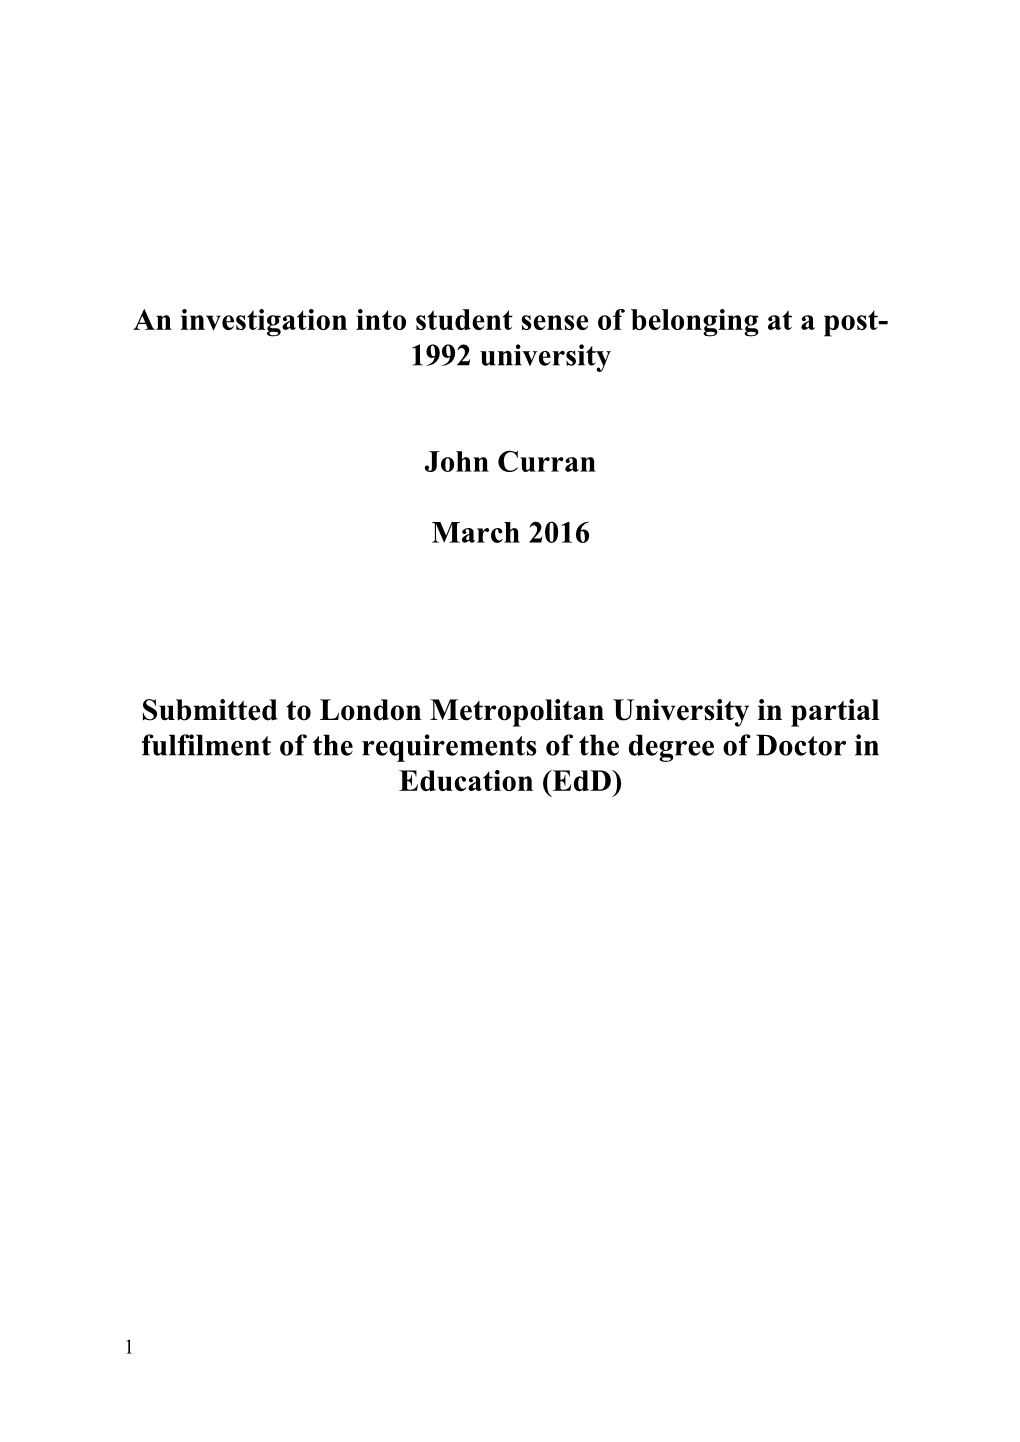 An Investigation Into Student Sense of Belonging at a Post- 1992 University John Curran March 2016 Submitted to London Metropoli